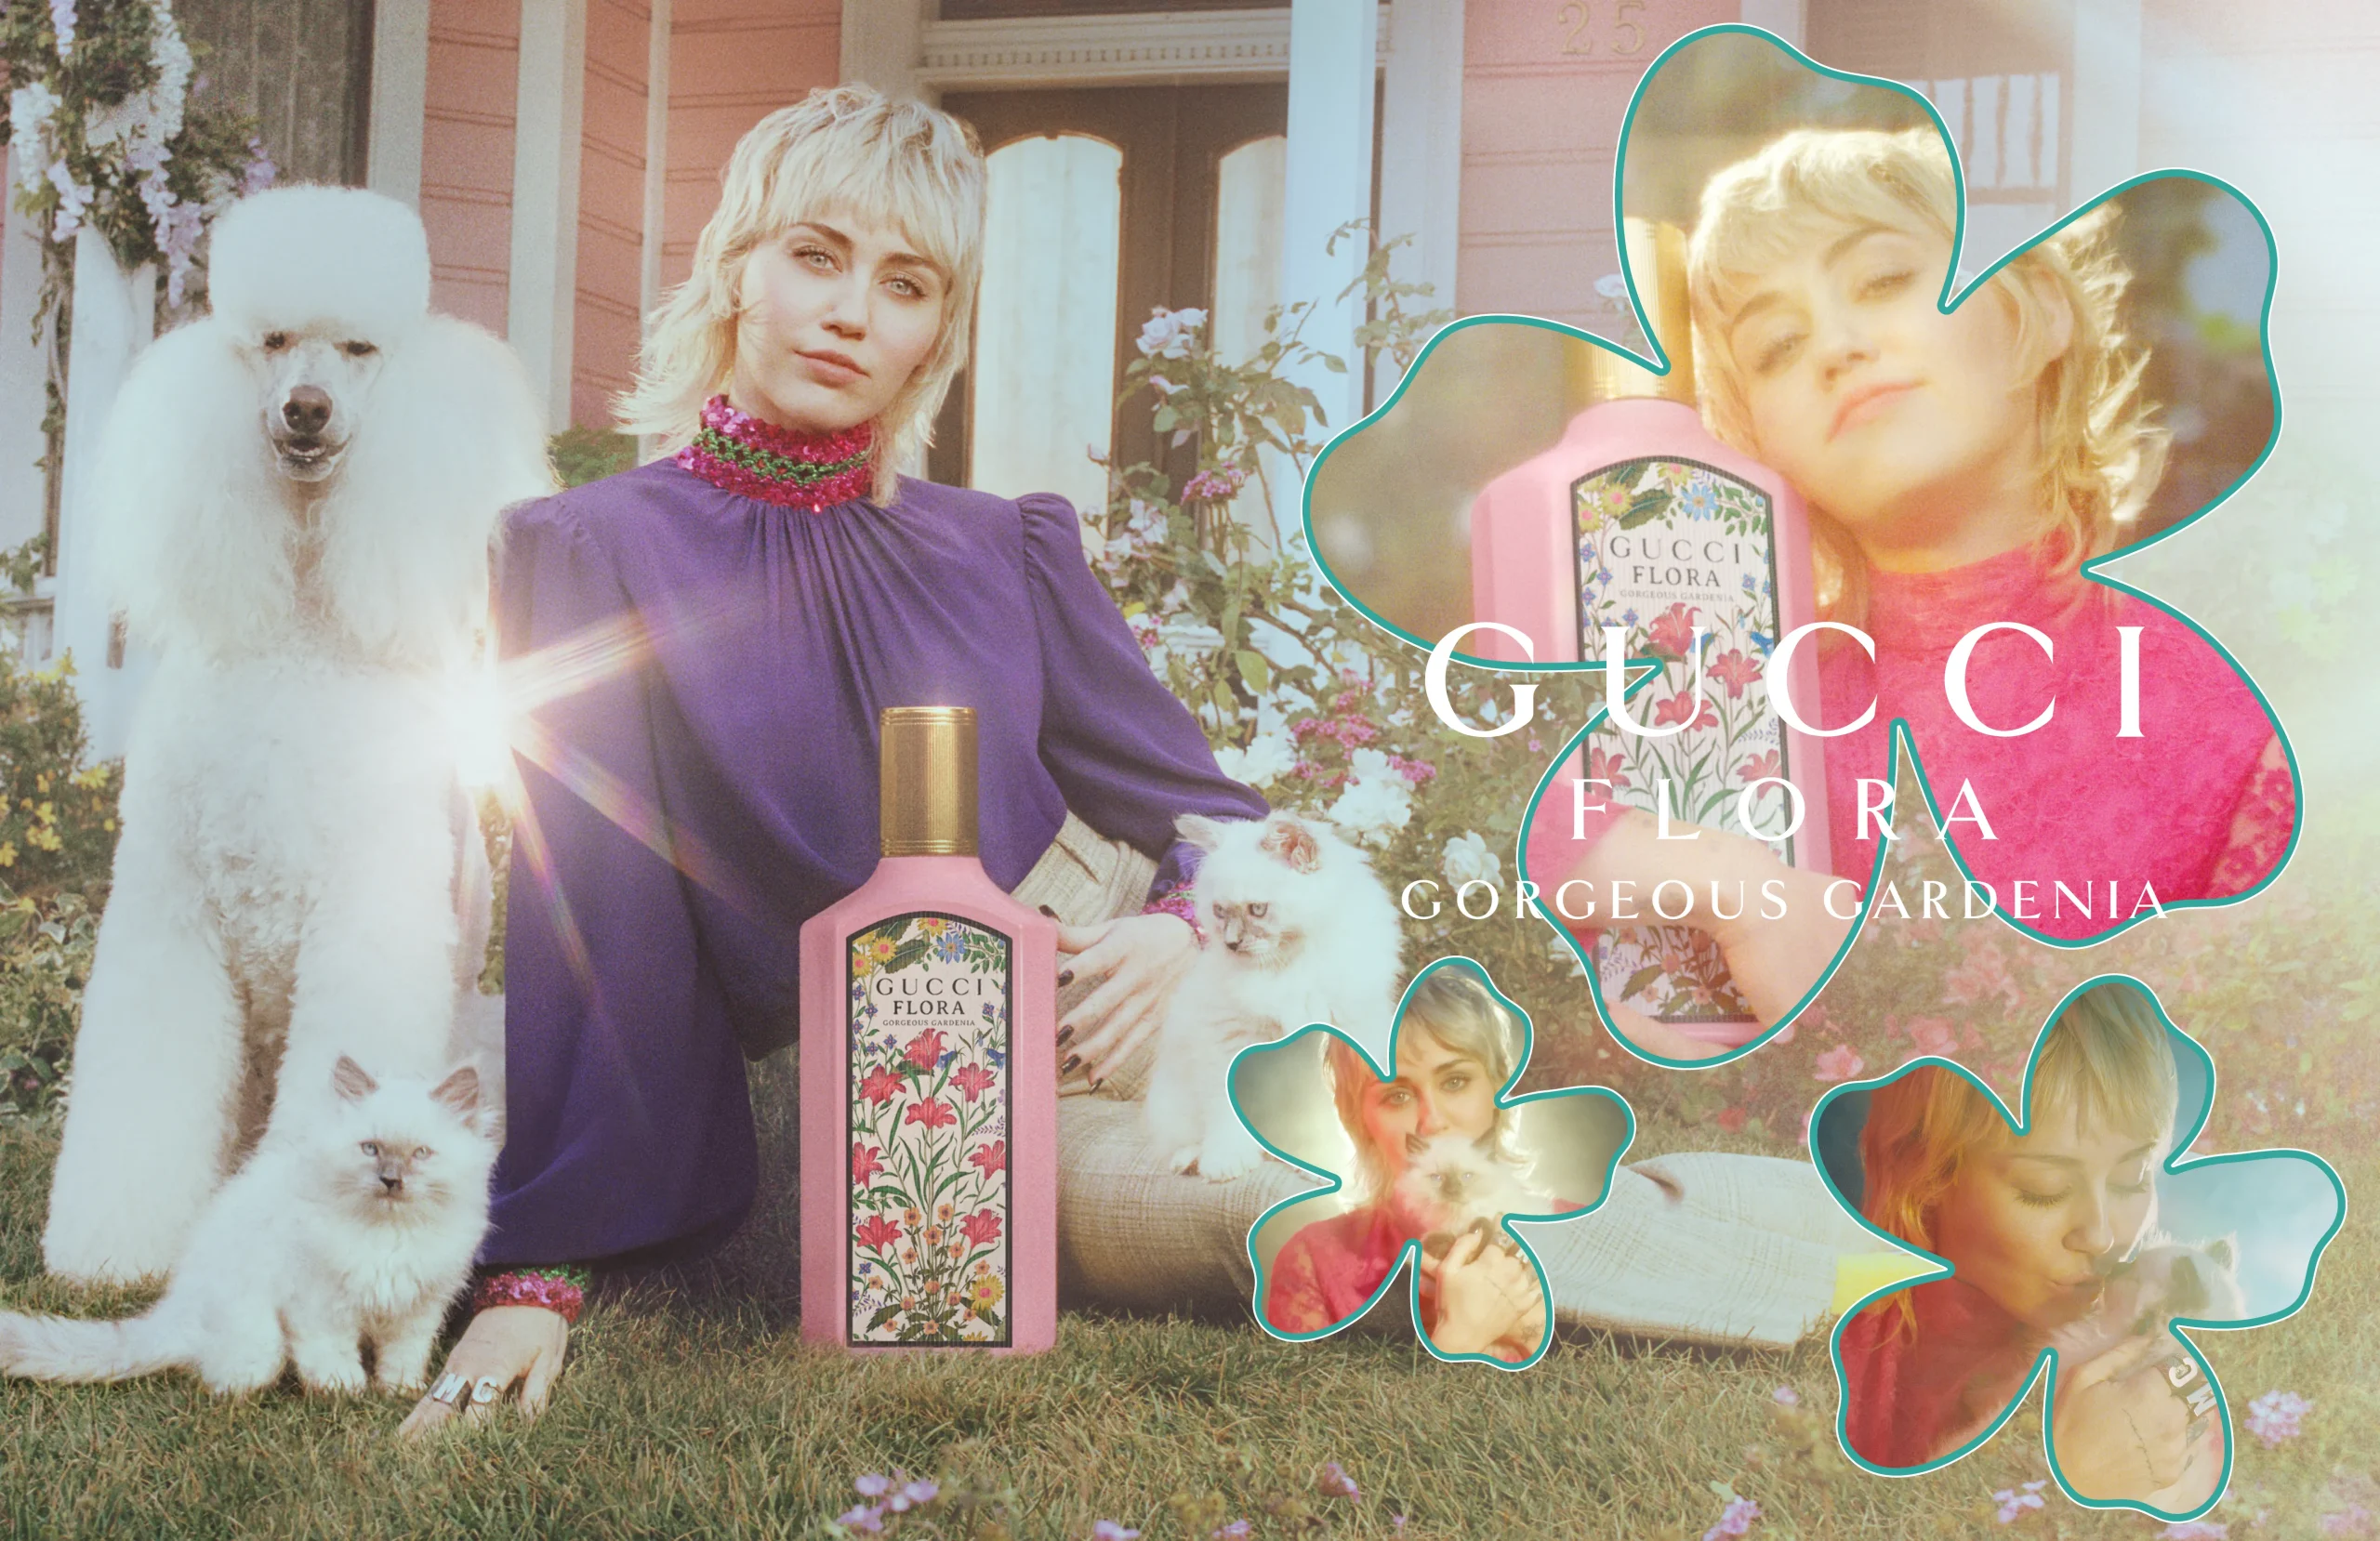 Miley Cyrus Says This Gucci Perfume “Reminds Me of Falling in Love for the First Time”